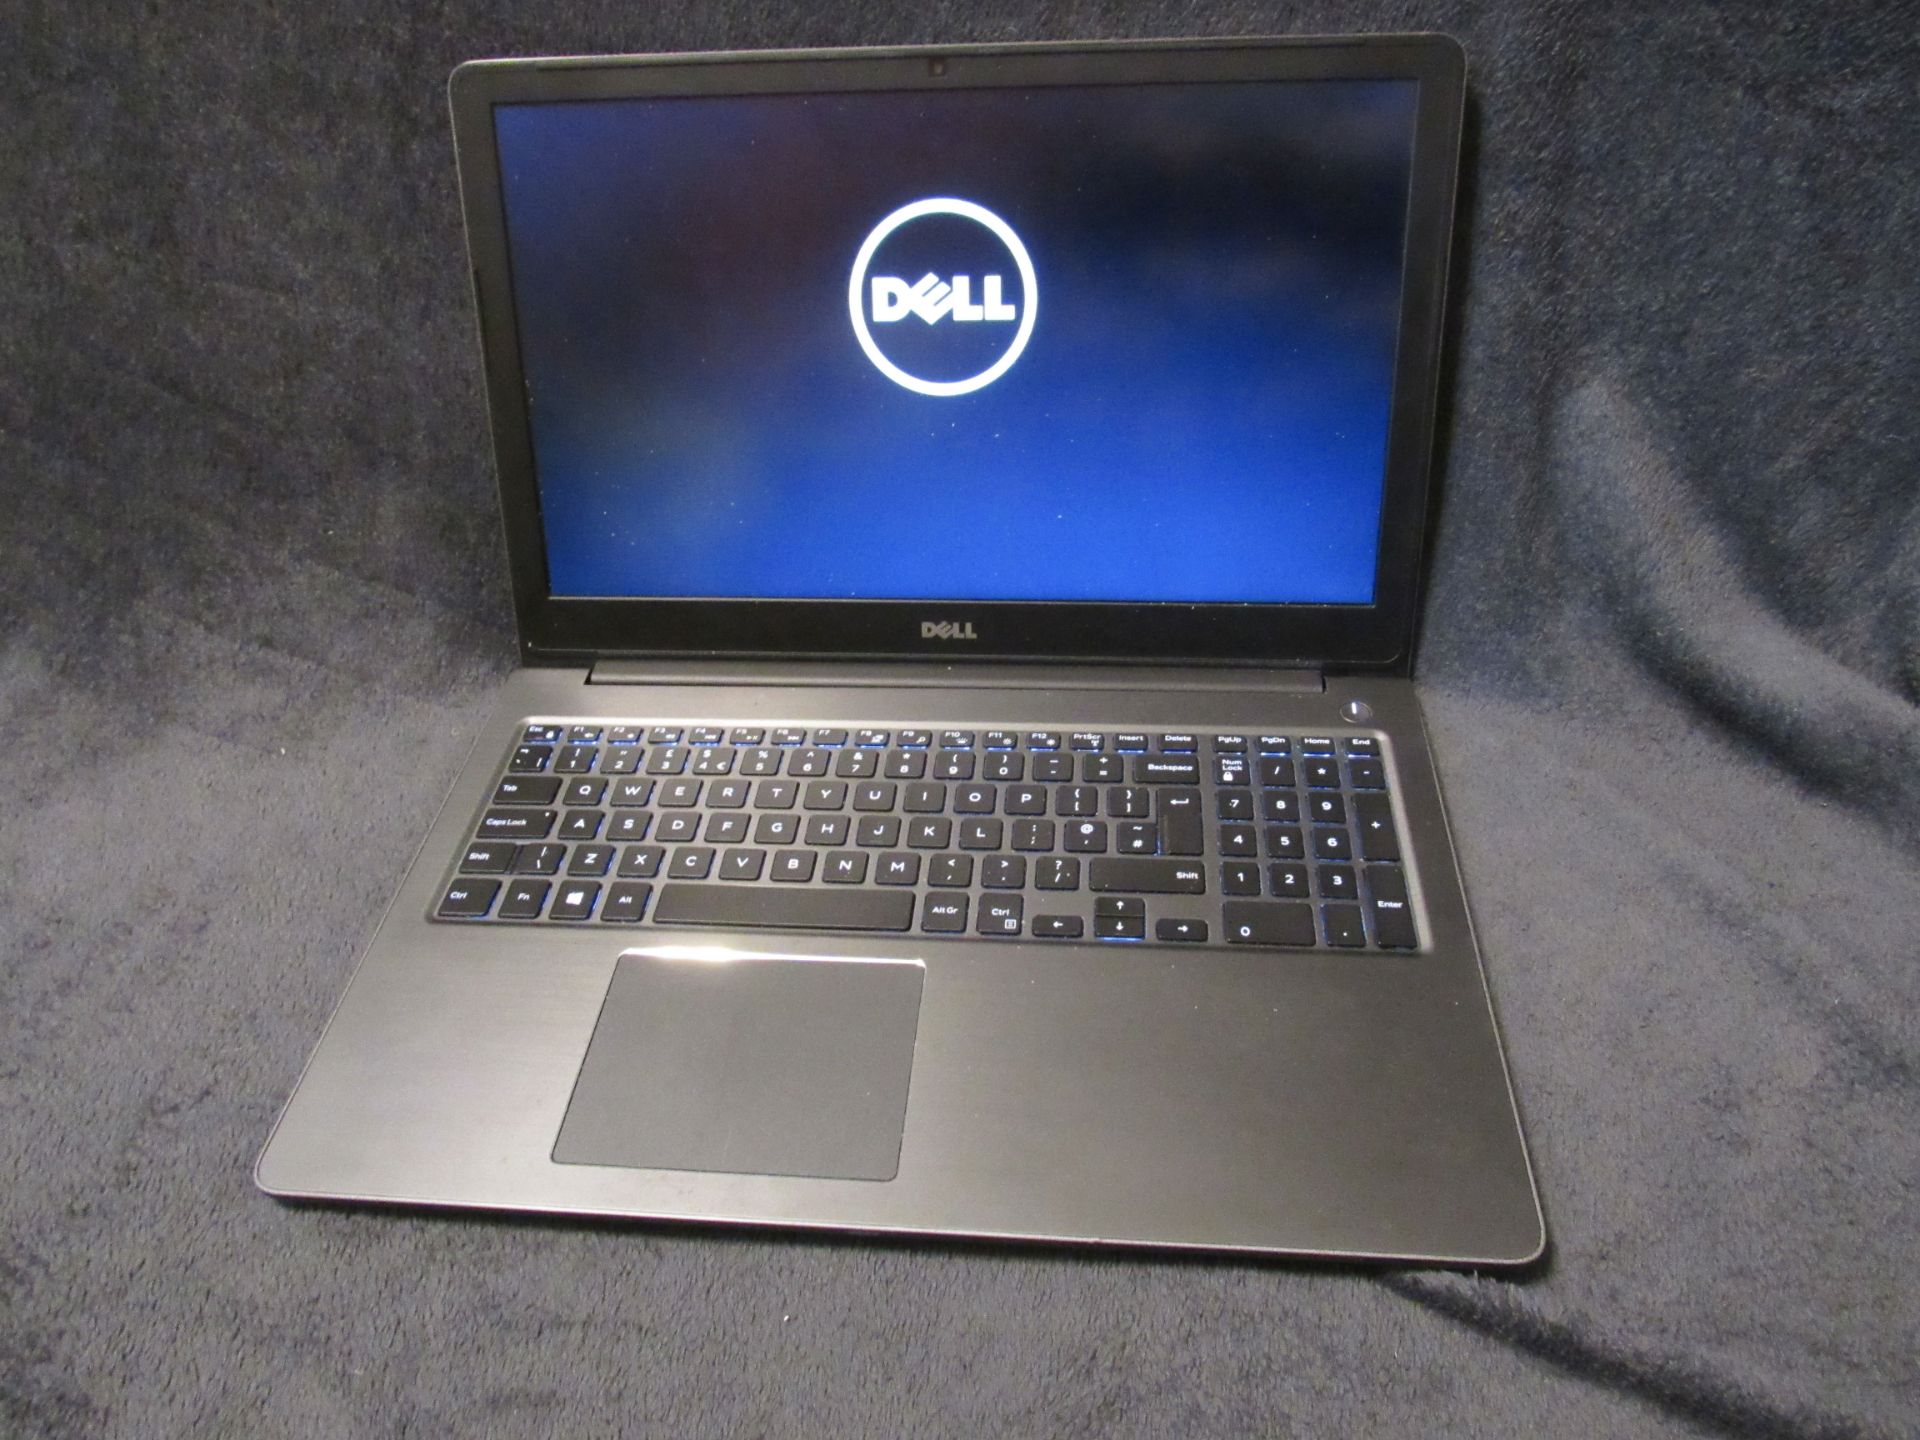 Dell P62F / Service Tag 3Q247H2 Intel i5-7200U 8GB Ram, 256GB SATA 6Gbps M.2 Internal Solid State - Image 5 of 7